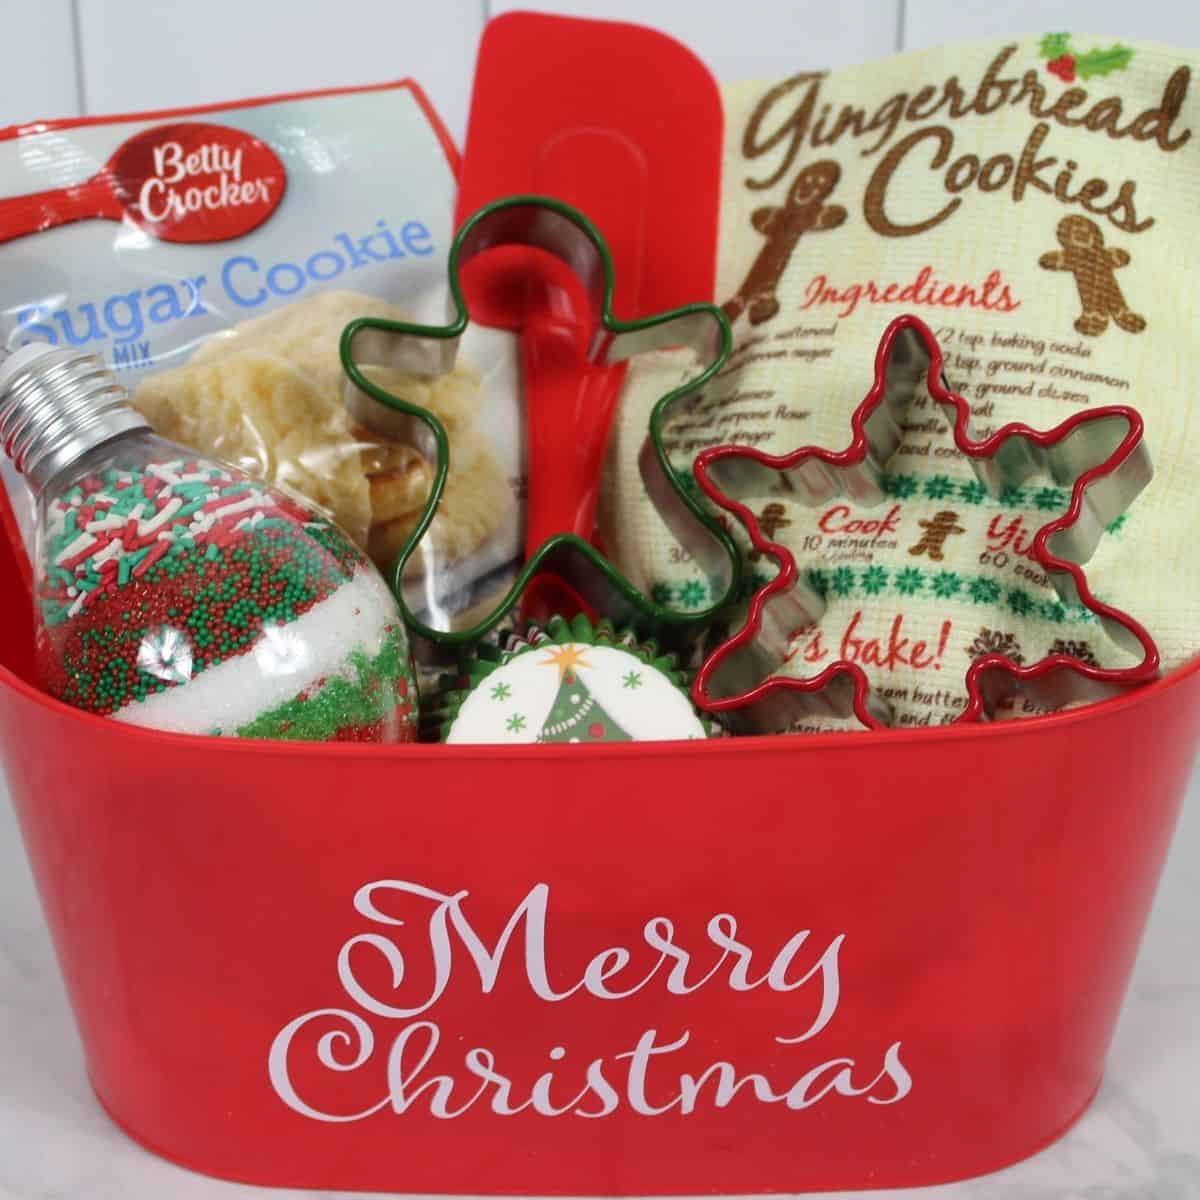 Christmas Baking Themed Gift Basket From The Dollar Tree